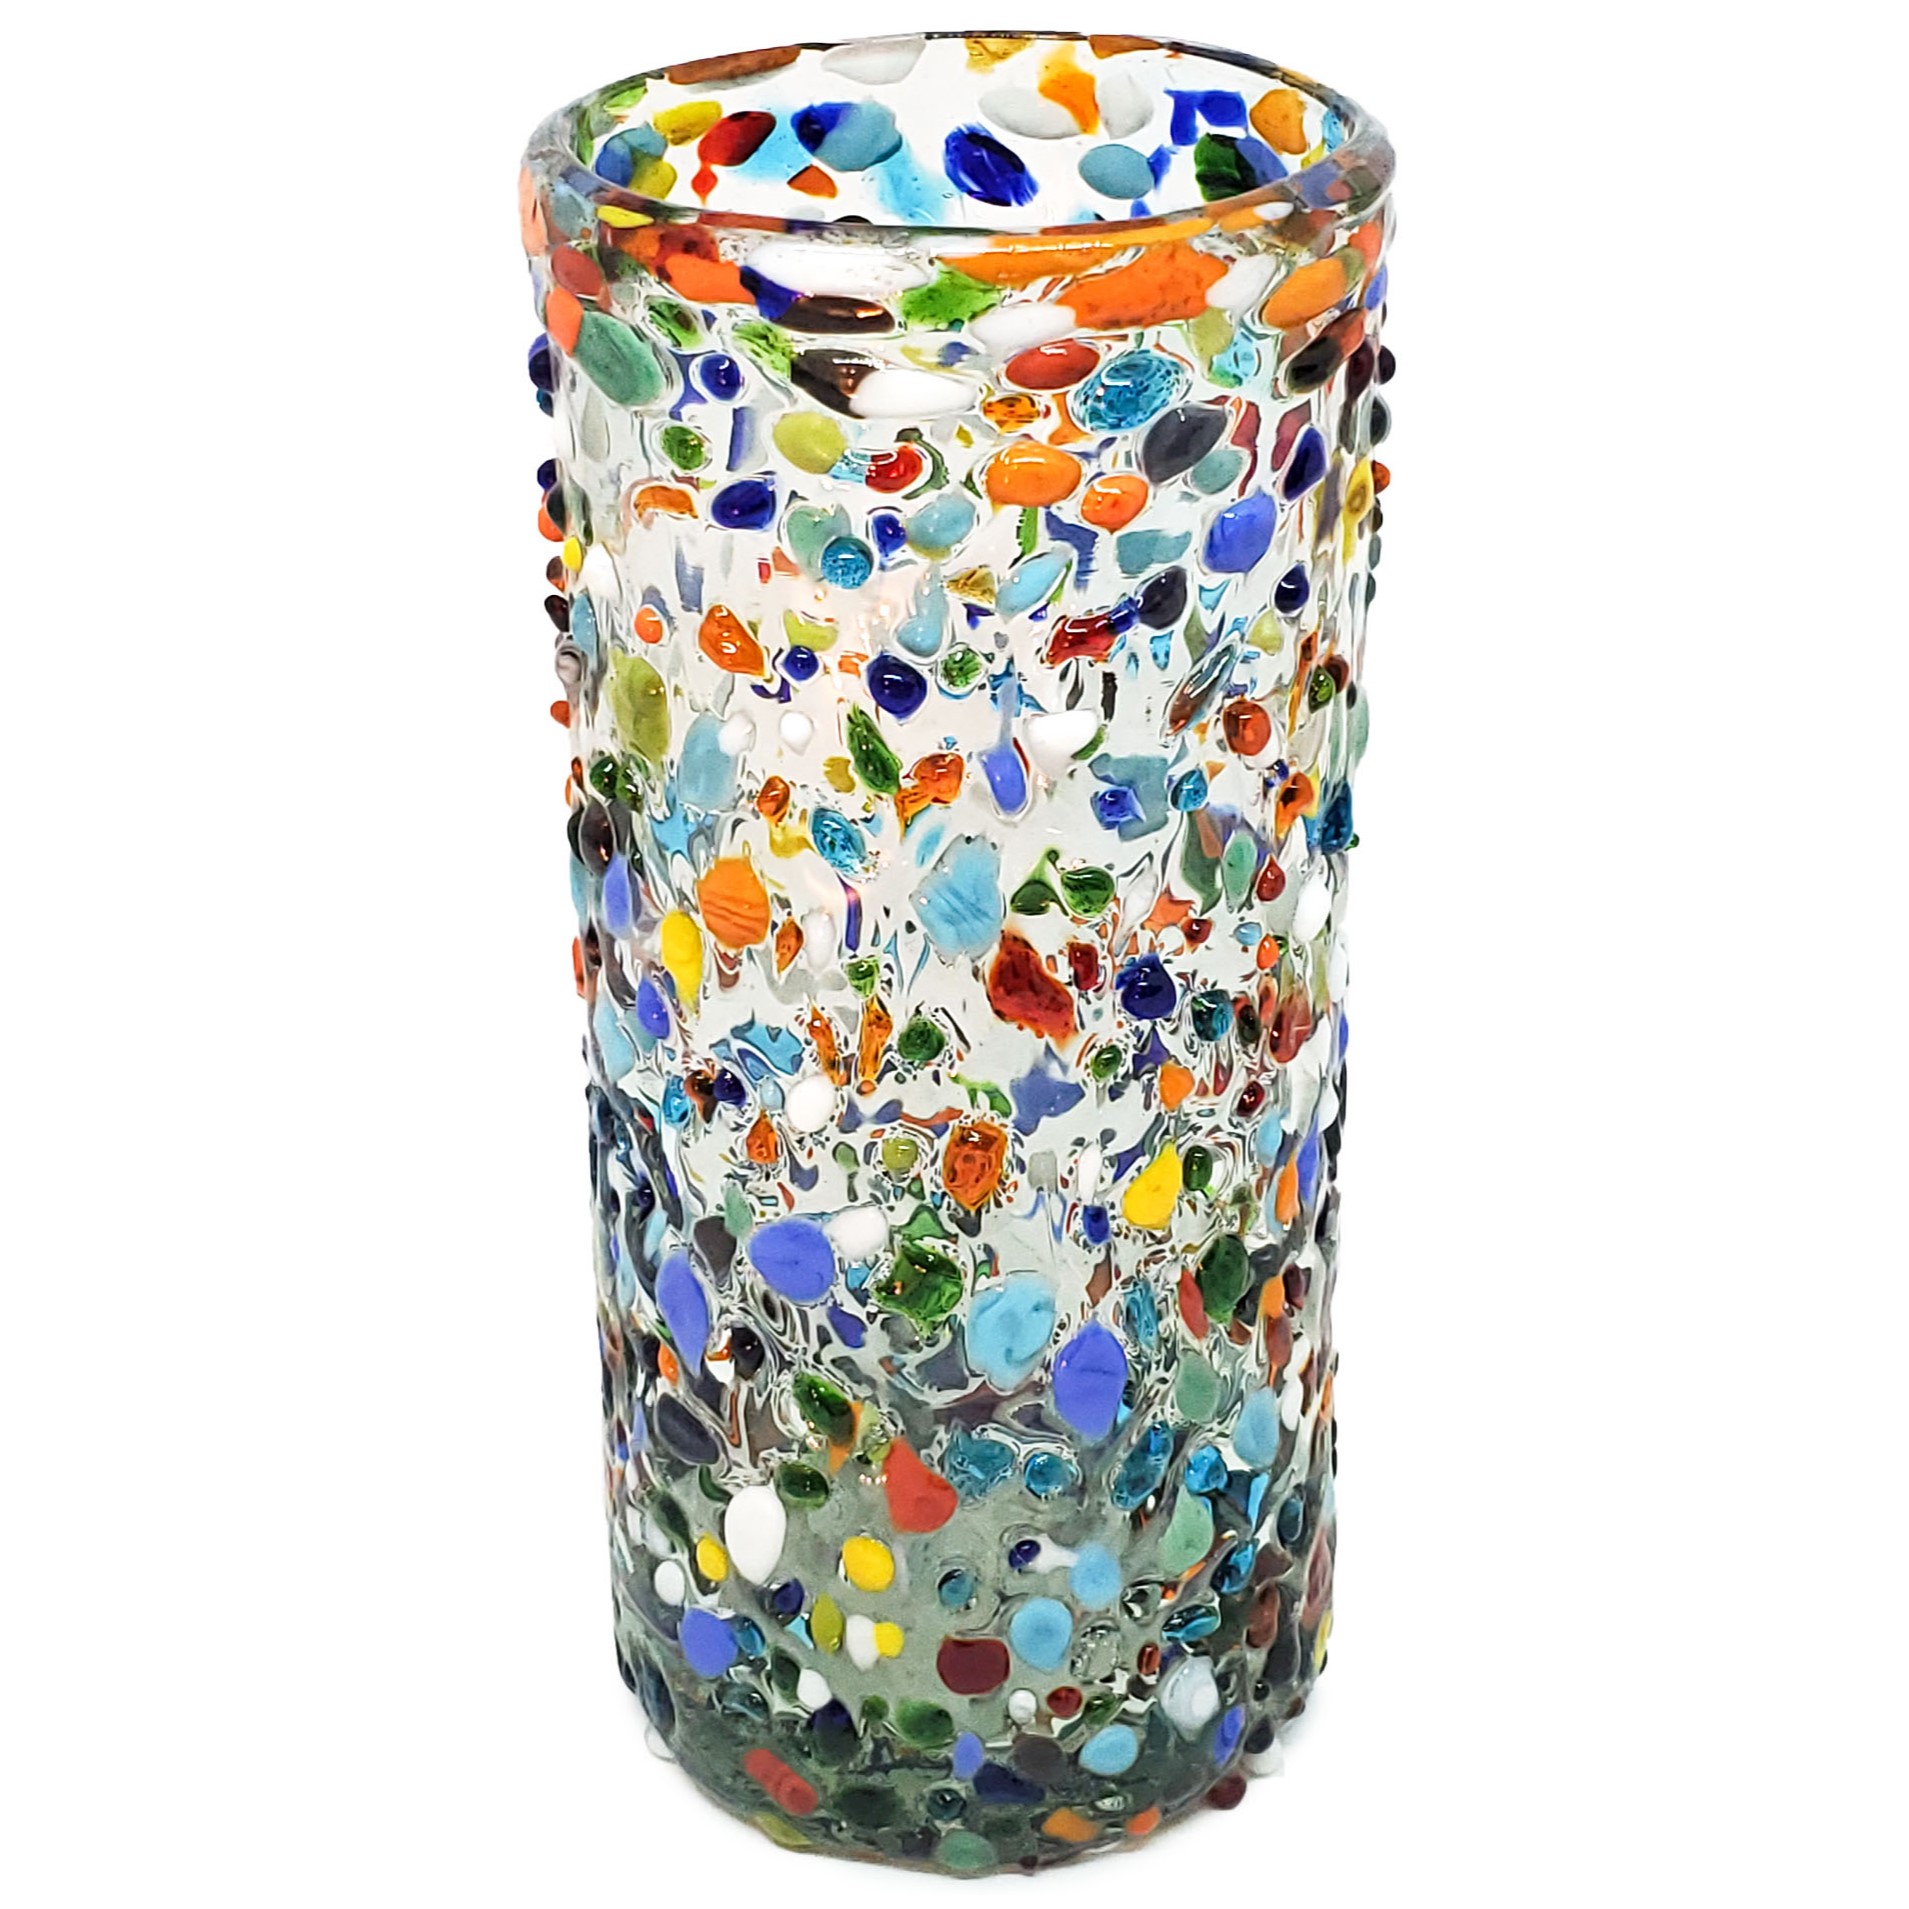 MEXICAN GLASSWARE / Confetti Rocks 20 oz Tall Iced Tea Glasses (set of 6) / Let the spring come into your home with this colorful set of glasses. The multicolor glass rocks decoration makes them a standout in any place.